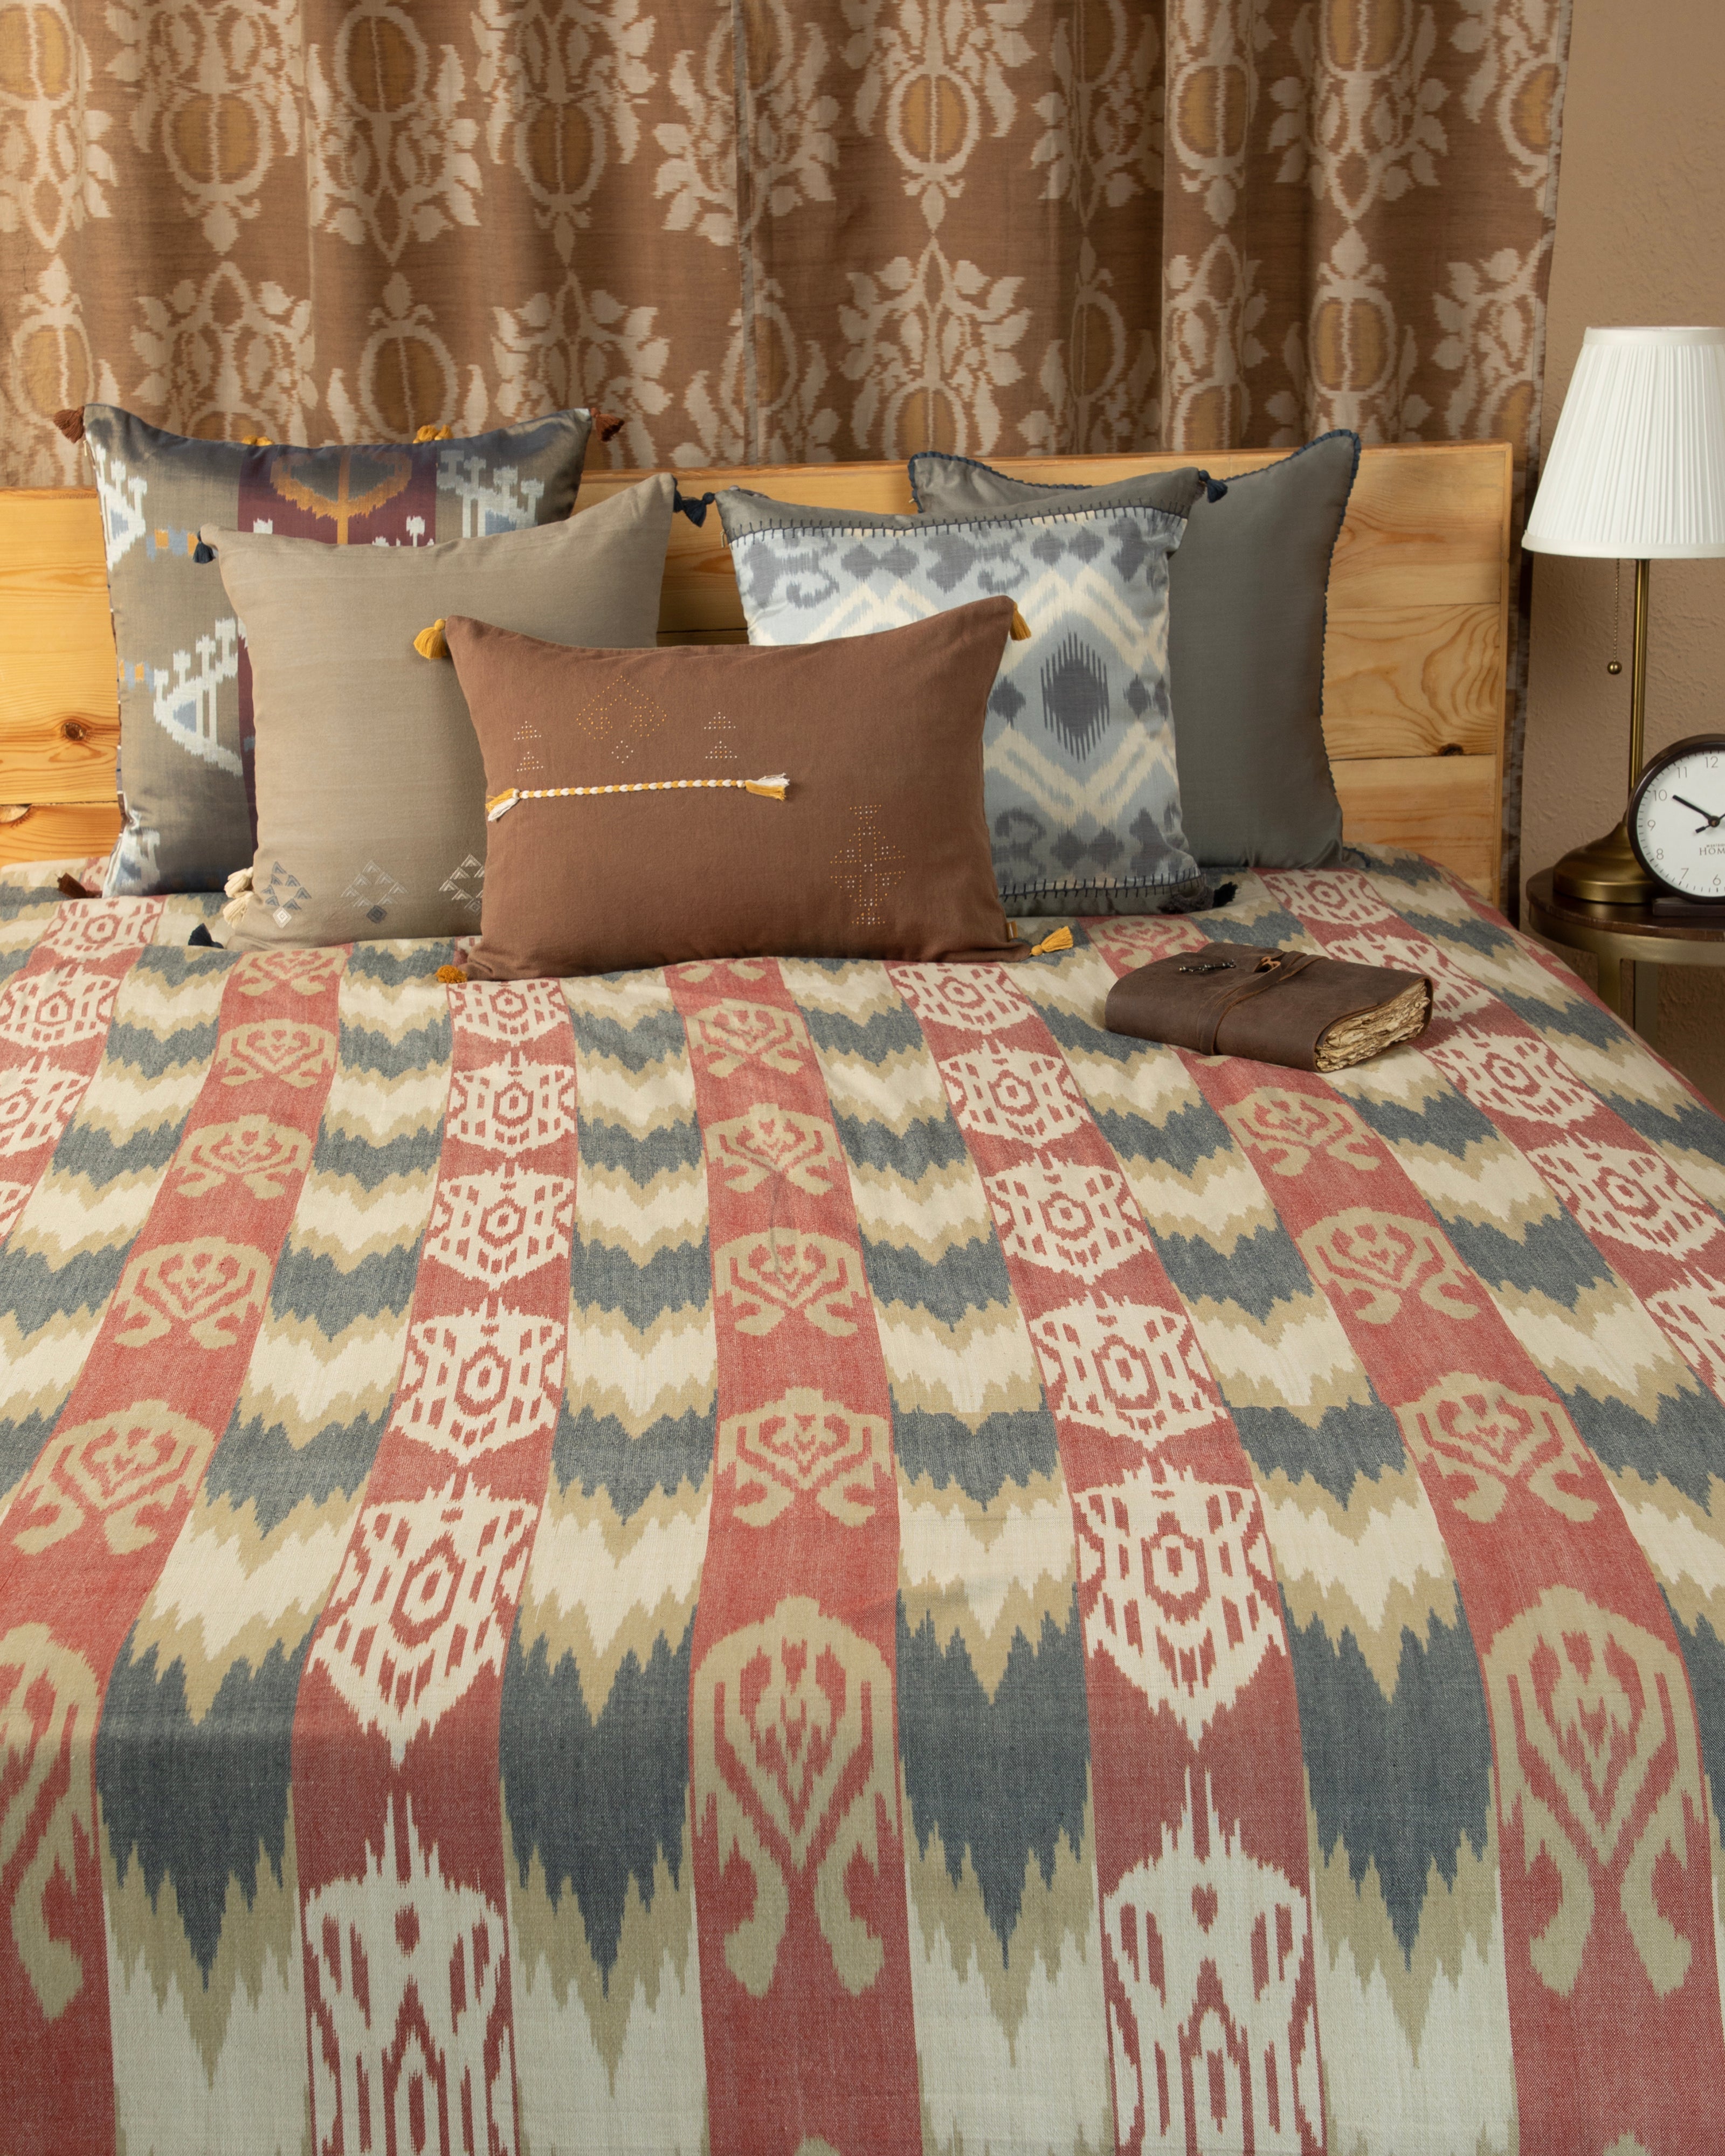 Feray Warp Ikat Cotton Bed Cover - Light Brown